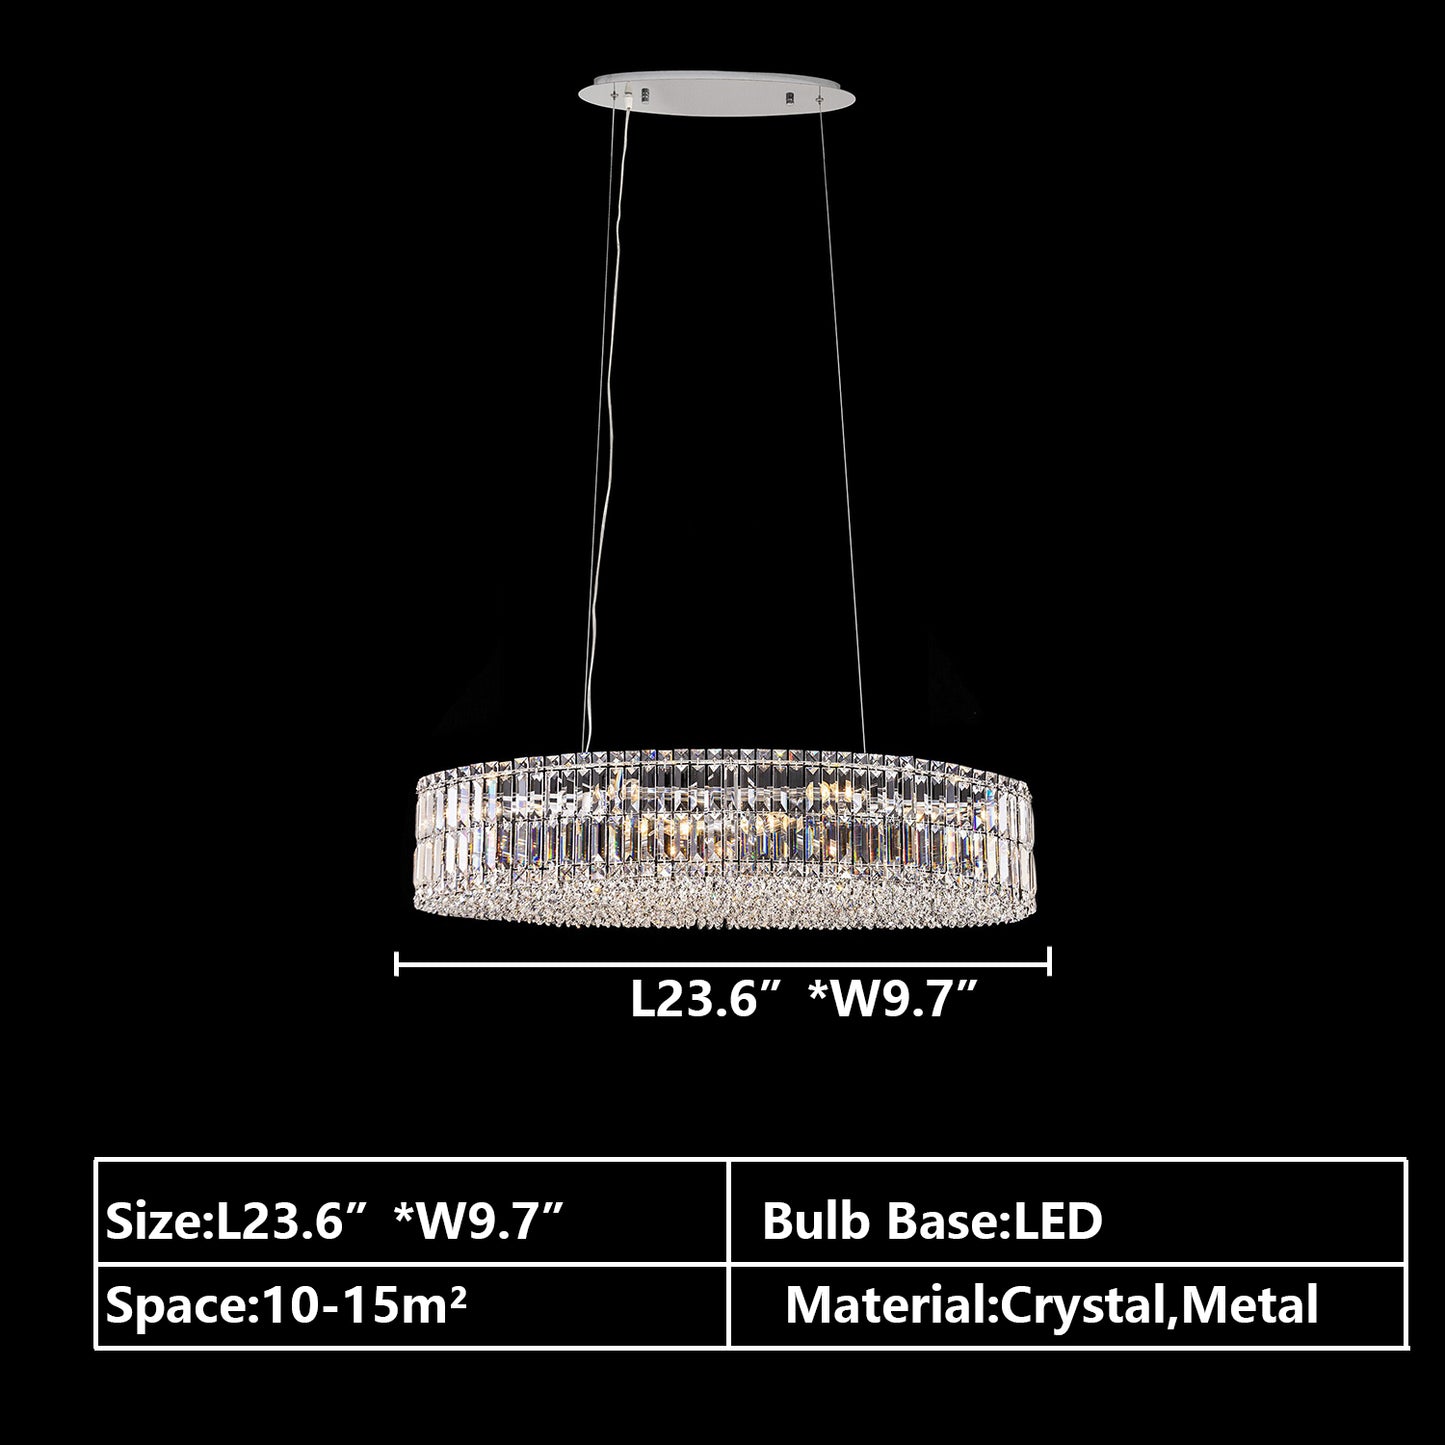 Oval:L23.6"*W9.7" chandelier,chandeliers,pendant,round,oval,ceiling,crystal,metal,chrome,silver,clear crystal,adjustable,chain,light luxury,luxury,living room,dining room,foyer,entrys,hallway,bathroom,bedroom,home office